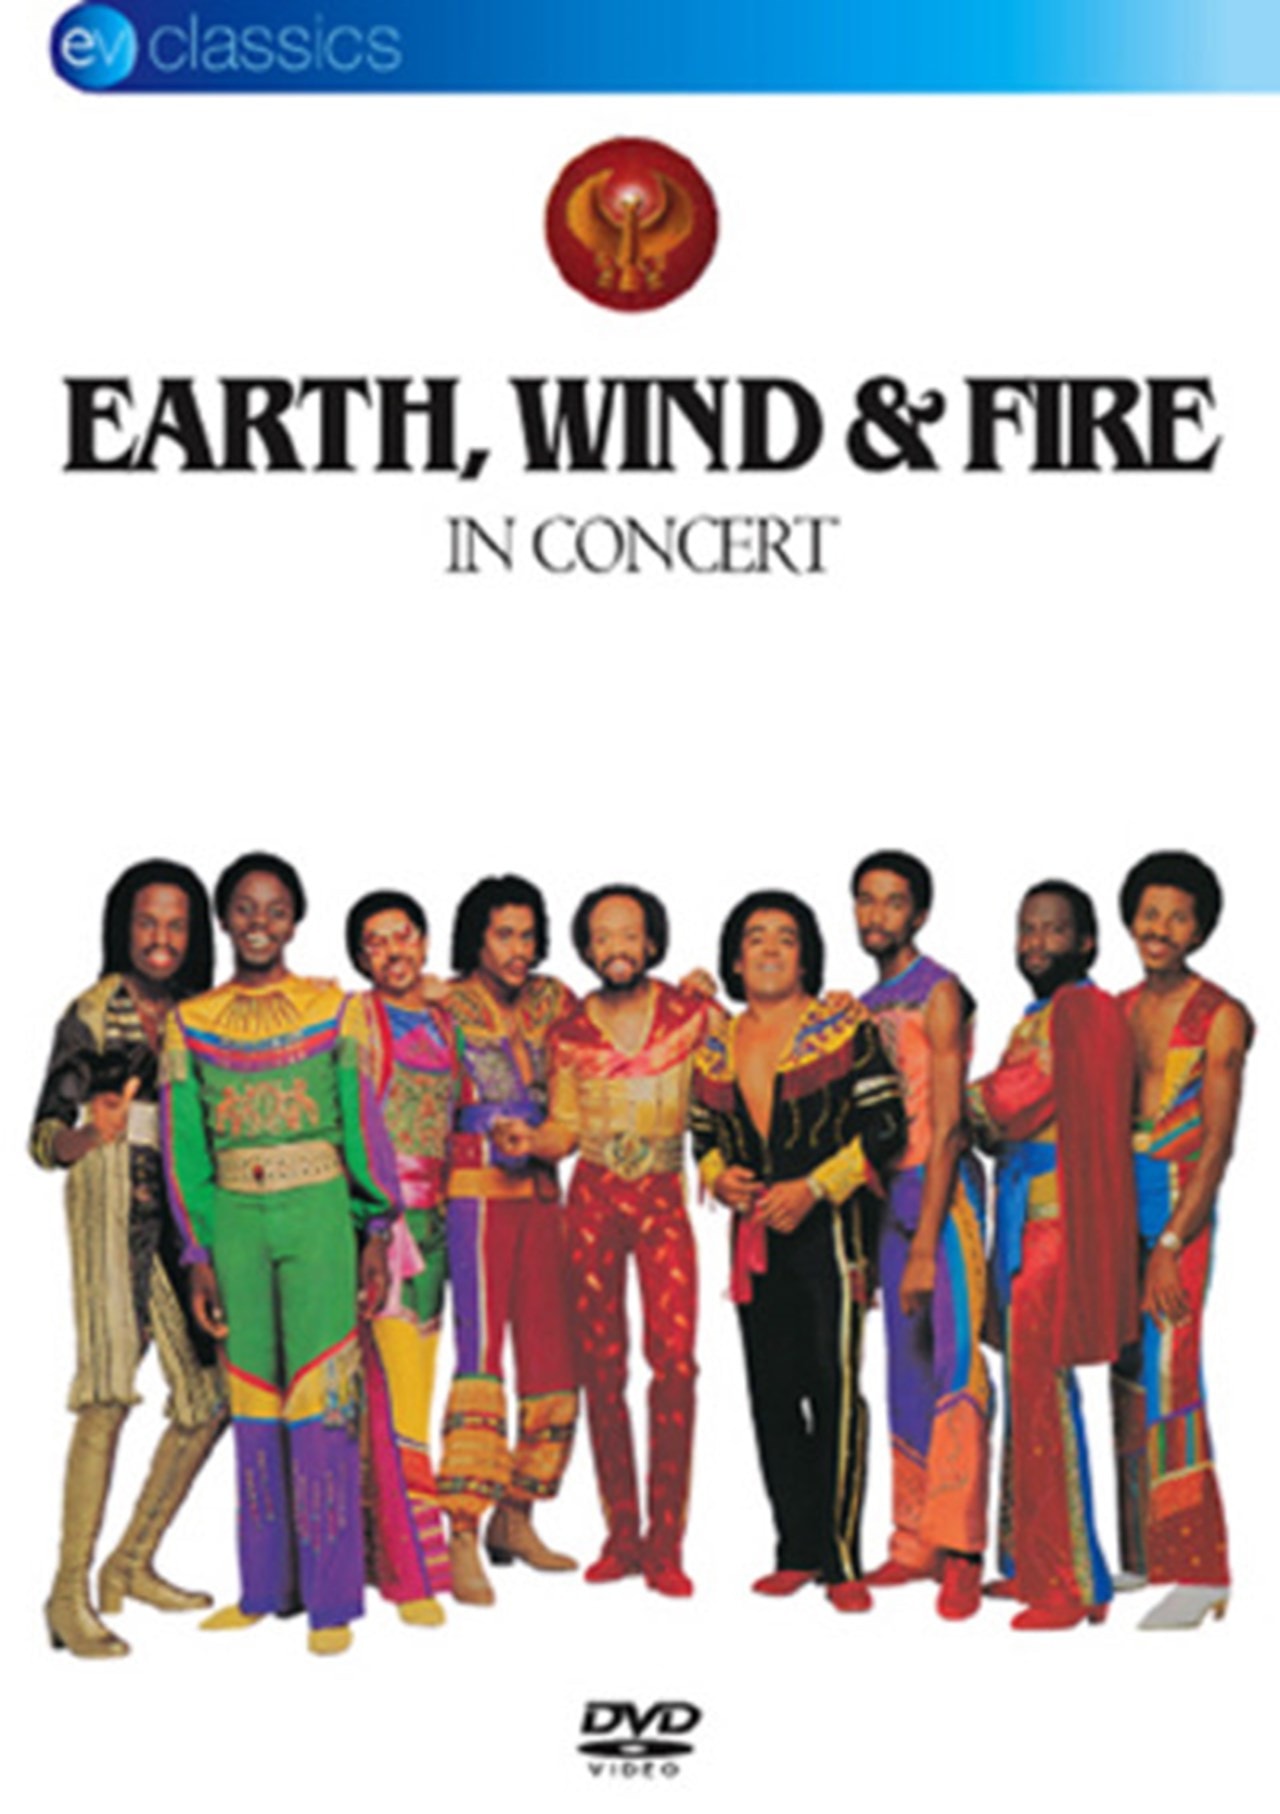 Earth Wind and Fire: In Concert | DVD | Free shipping over £20 | HMV Store